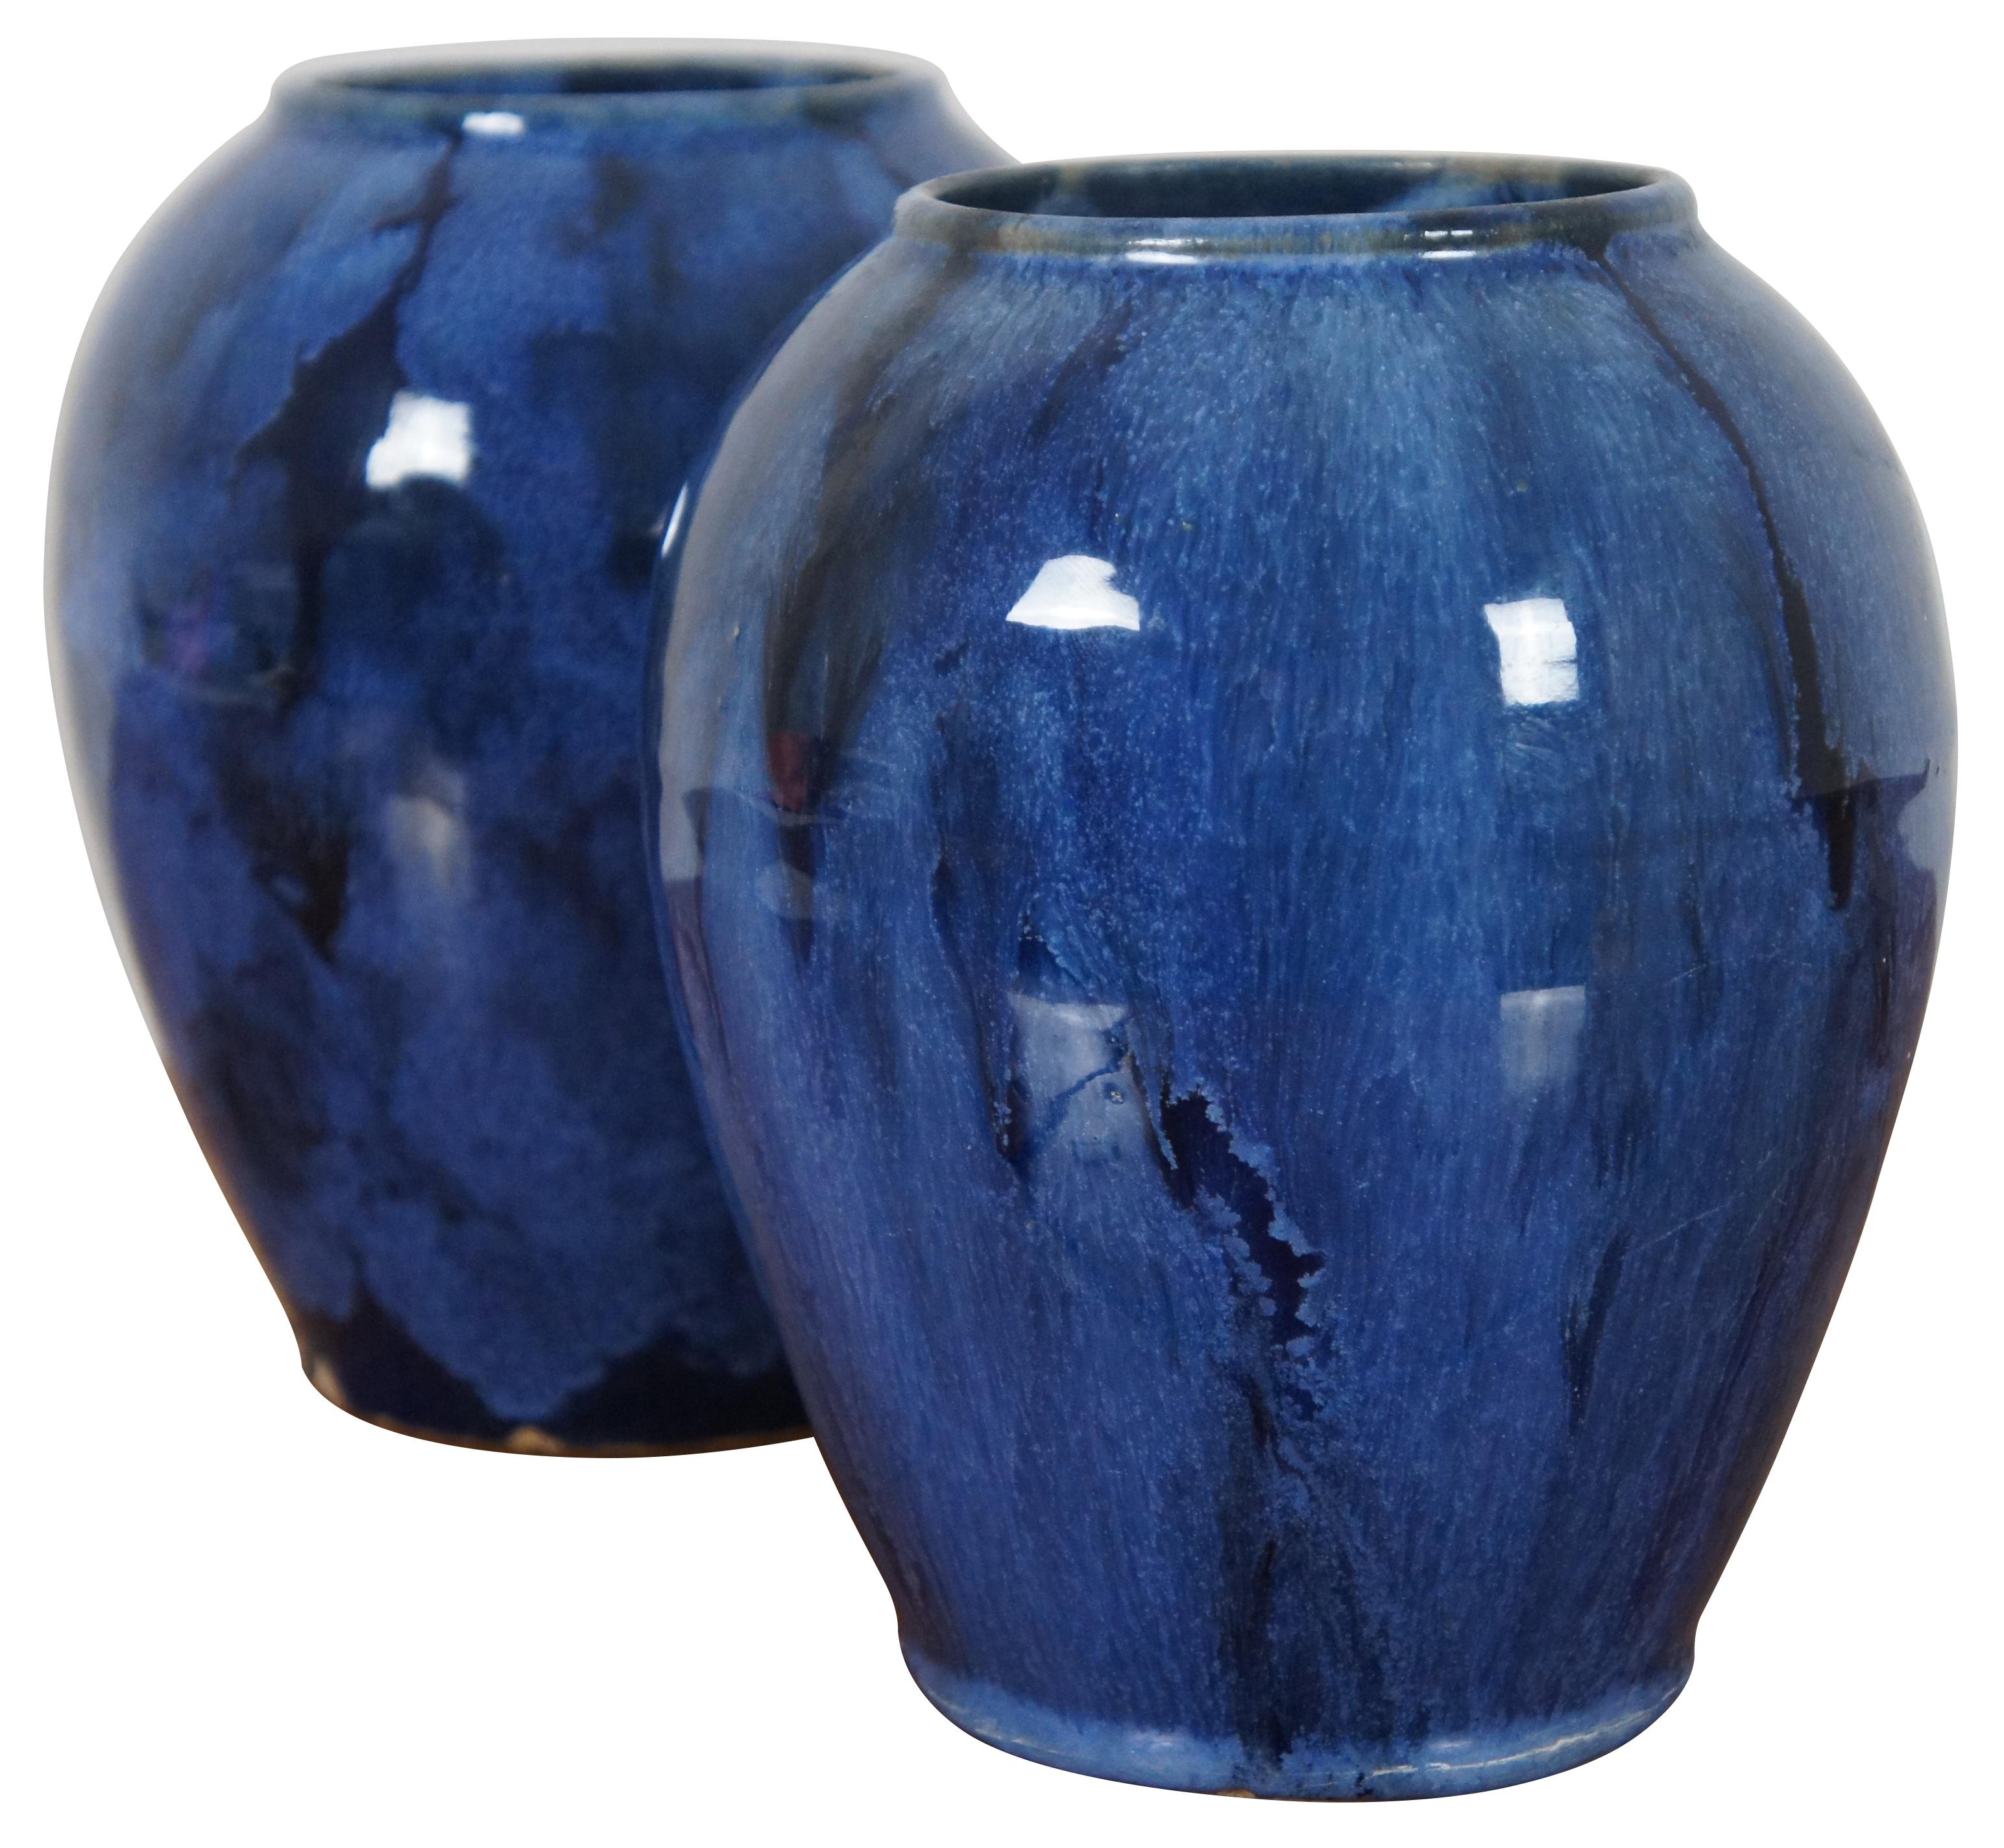 Pair of antique circa 1924 vases, attributed to Brush-McCoy in their iconic Blue Onyx glaze.

“In 1848, J.W. McCoy was born and raised in Putnam, which is now part of Zanesville, Ohio. He was married in 1870, and the next year he and Sarah (Sade)